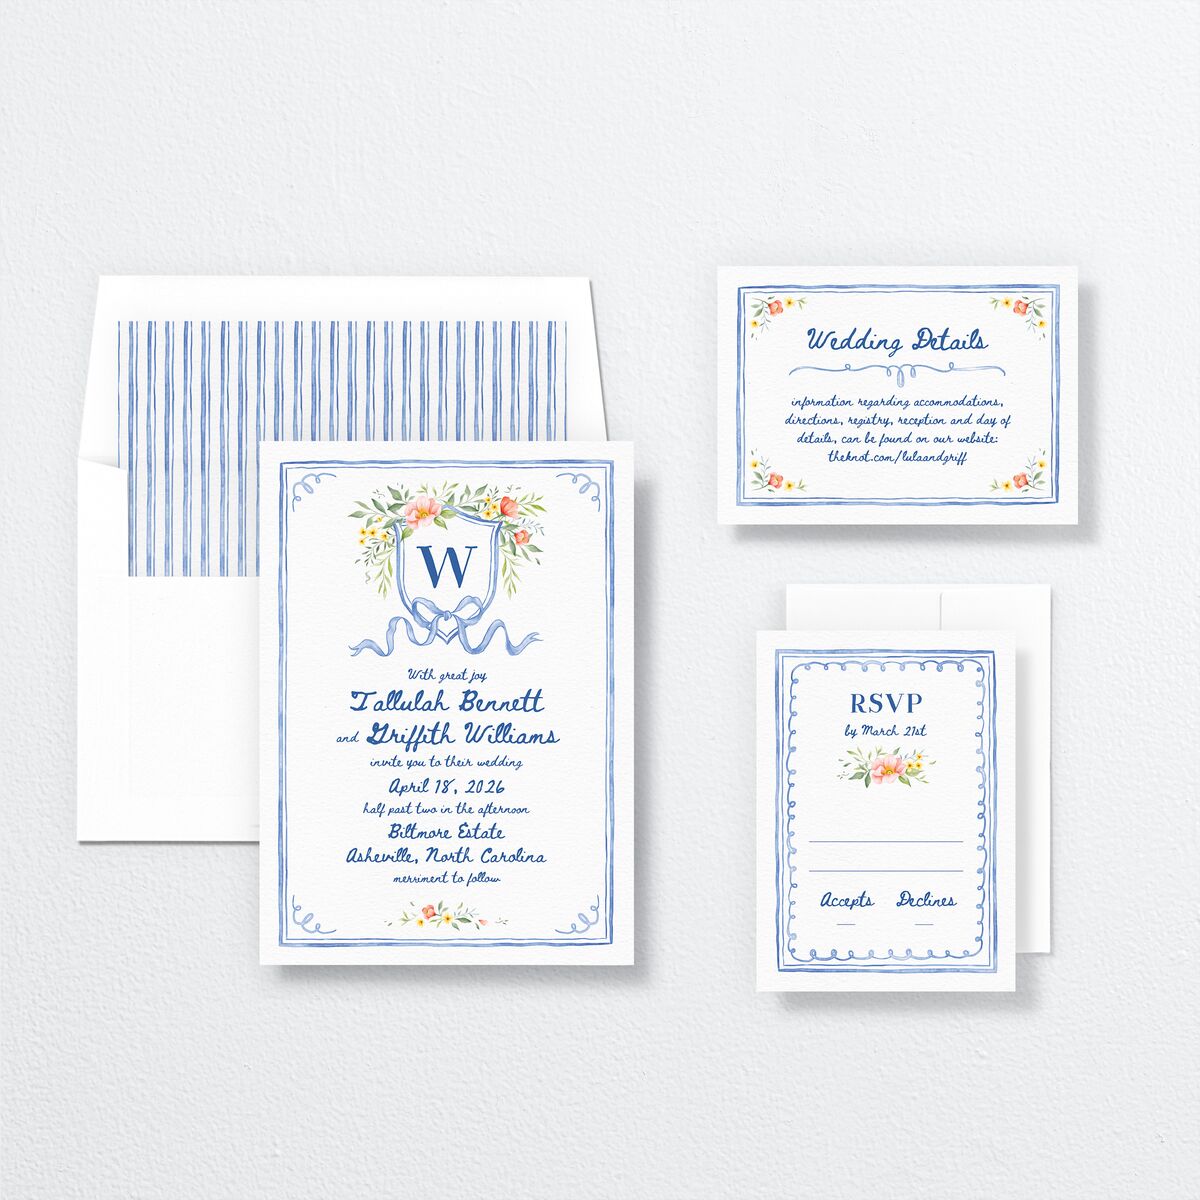 Countryside Crest Wedding Invitations suite